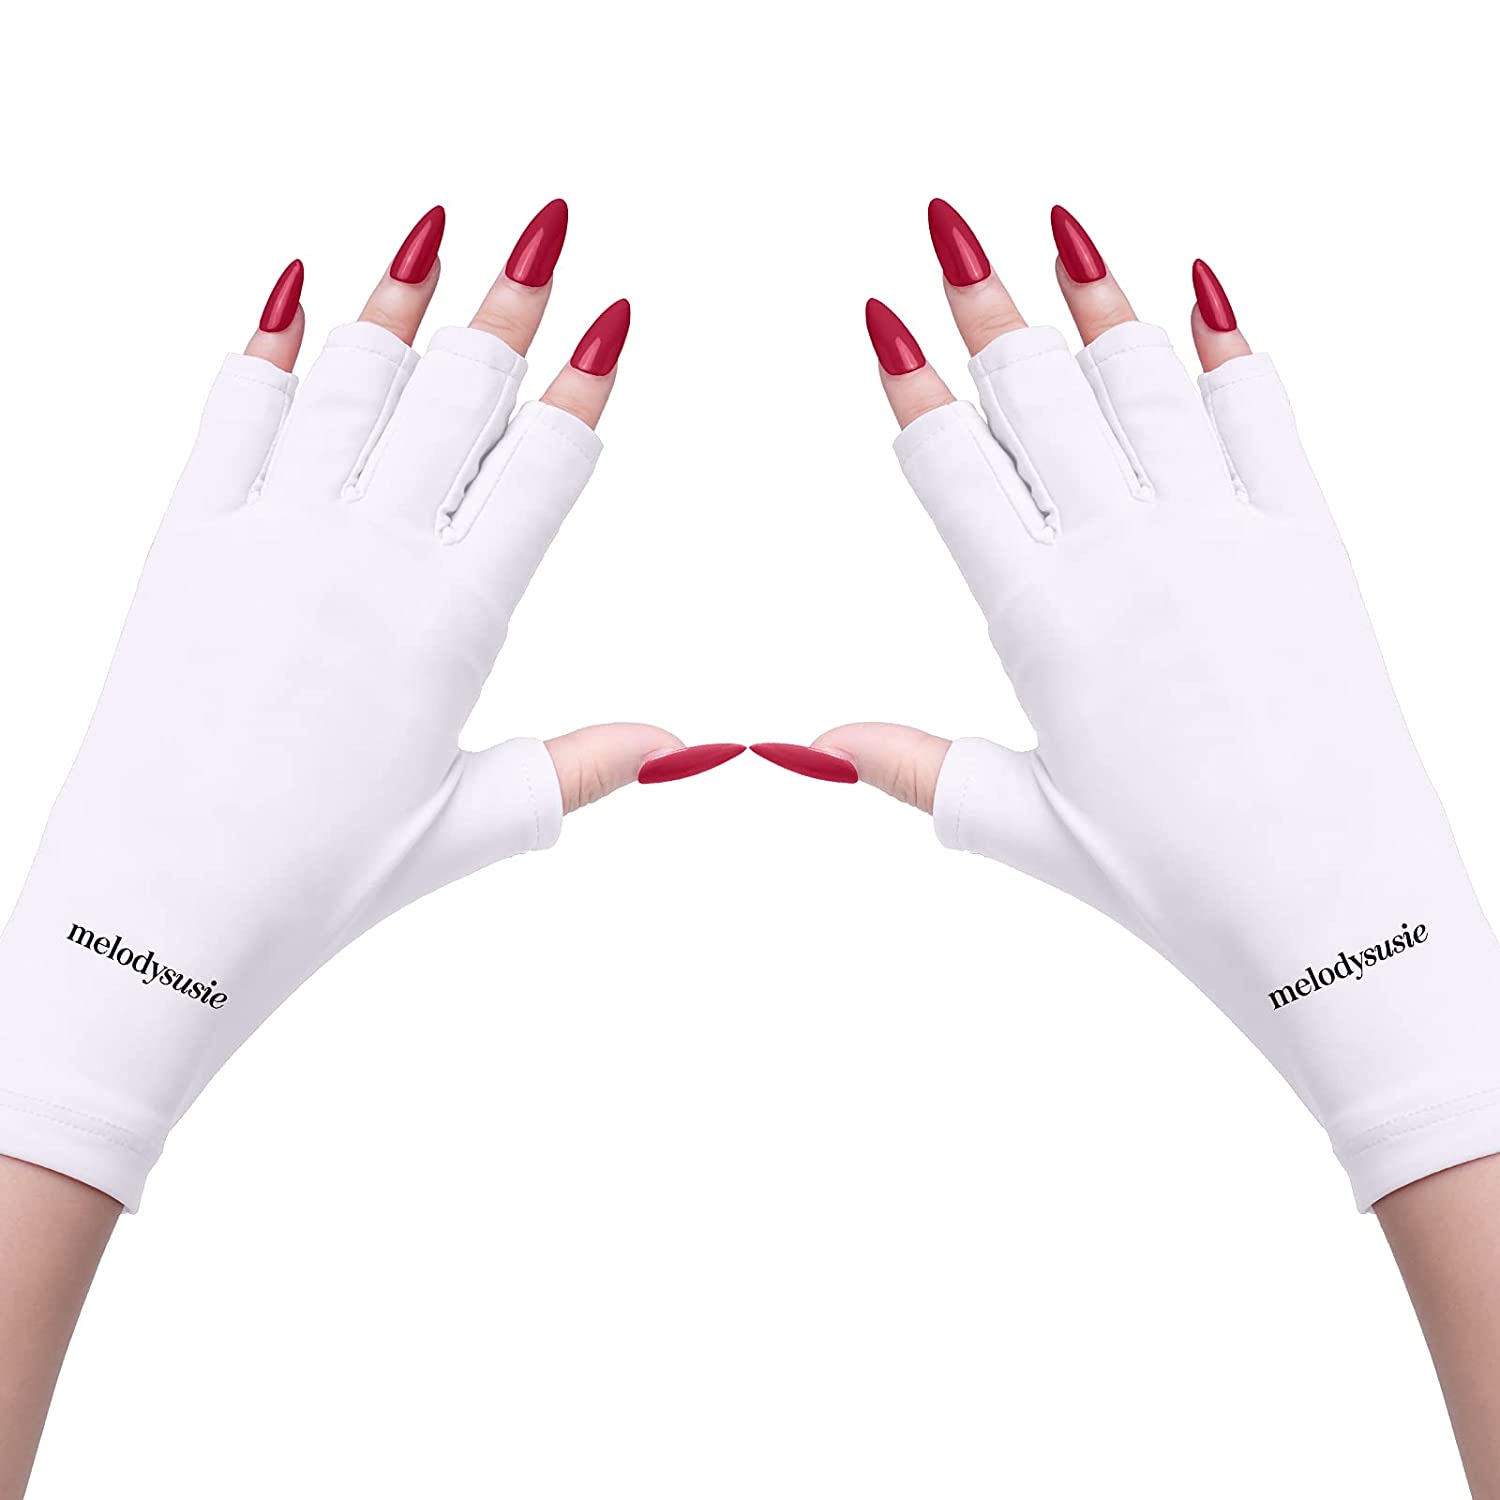 yolai gloves for gel nail lamp sun gloves for women home outdoor use  fingerless gloves for protecting hands from nails light 